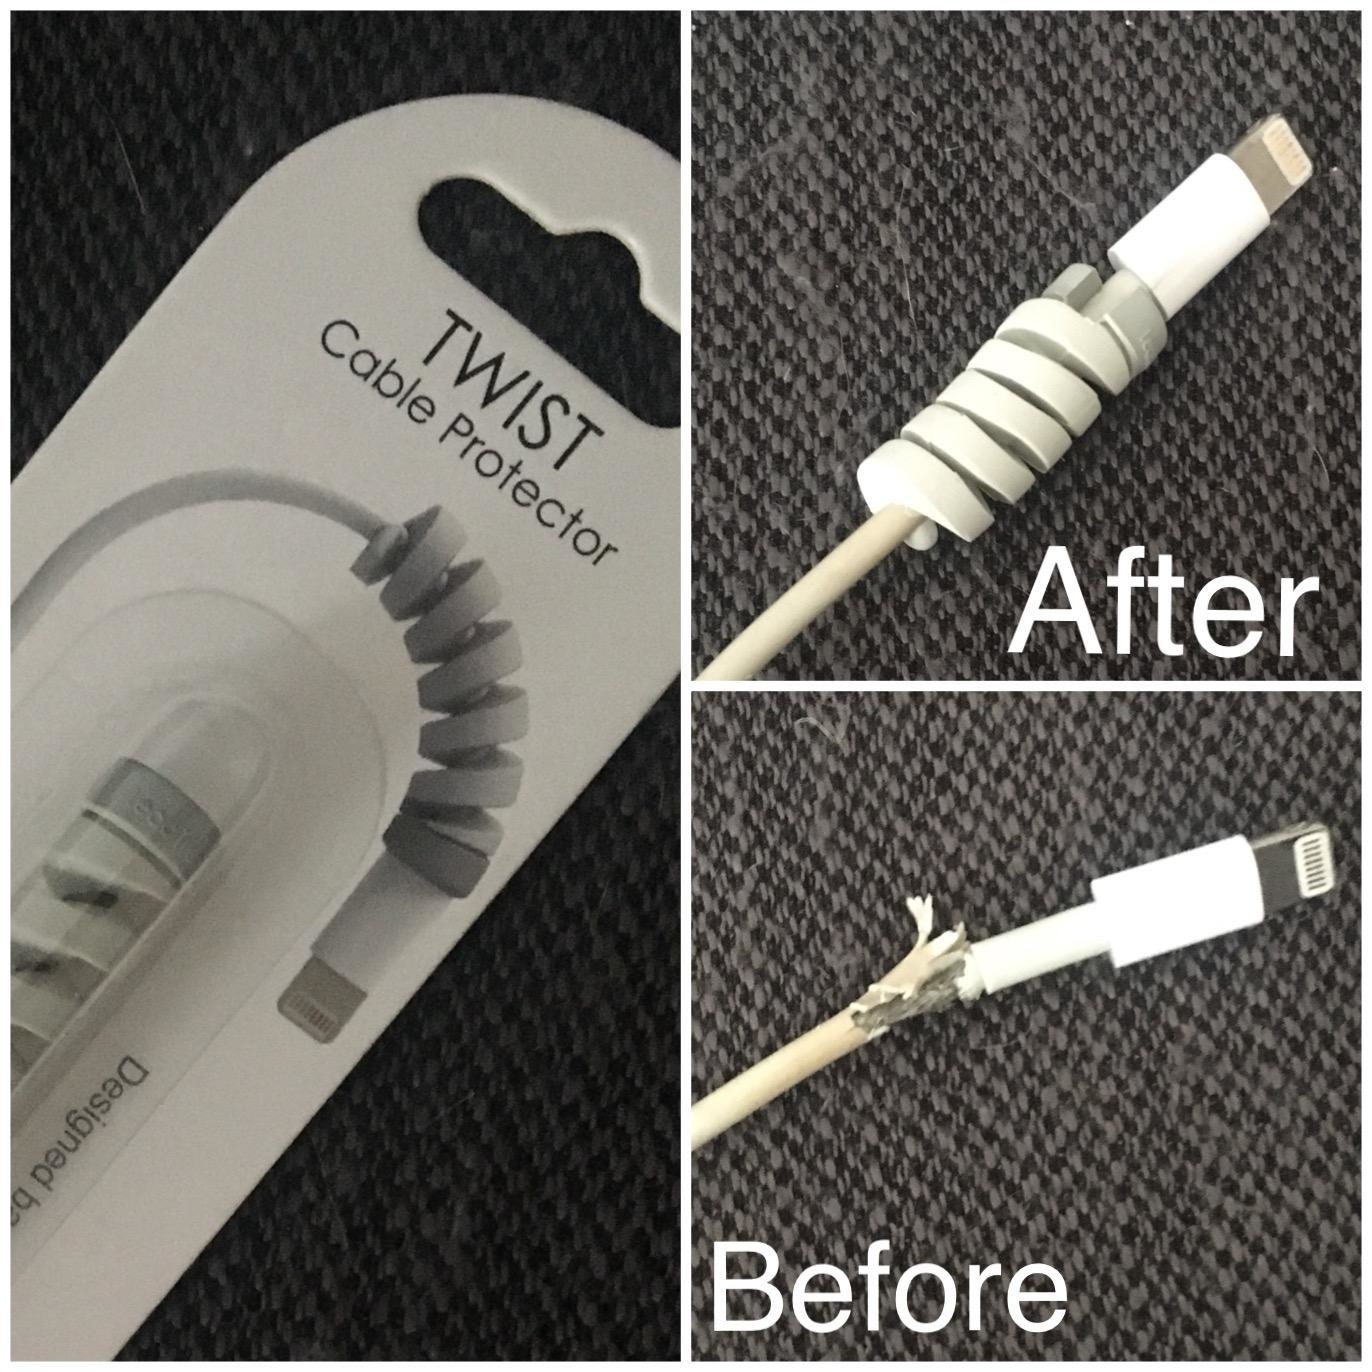 on the left, product in packaging labeled &quot;Twist cable protector&quot; on the bottom right a frayed cord labeled &quot;before&quot; and on the top right an unfrayed cord with the protector labeled &quot;after&quot;